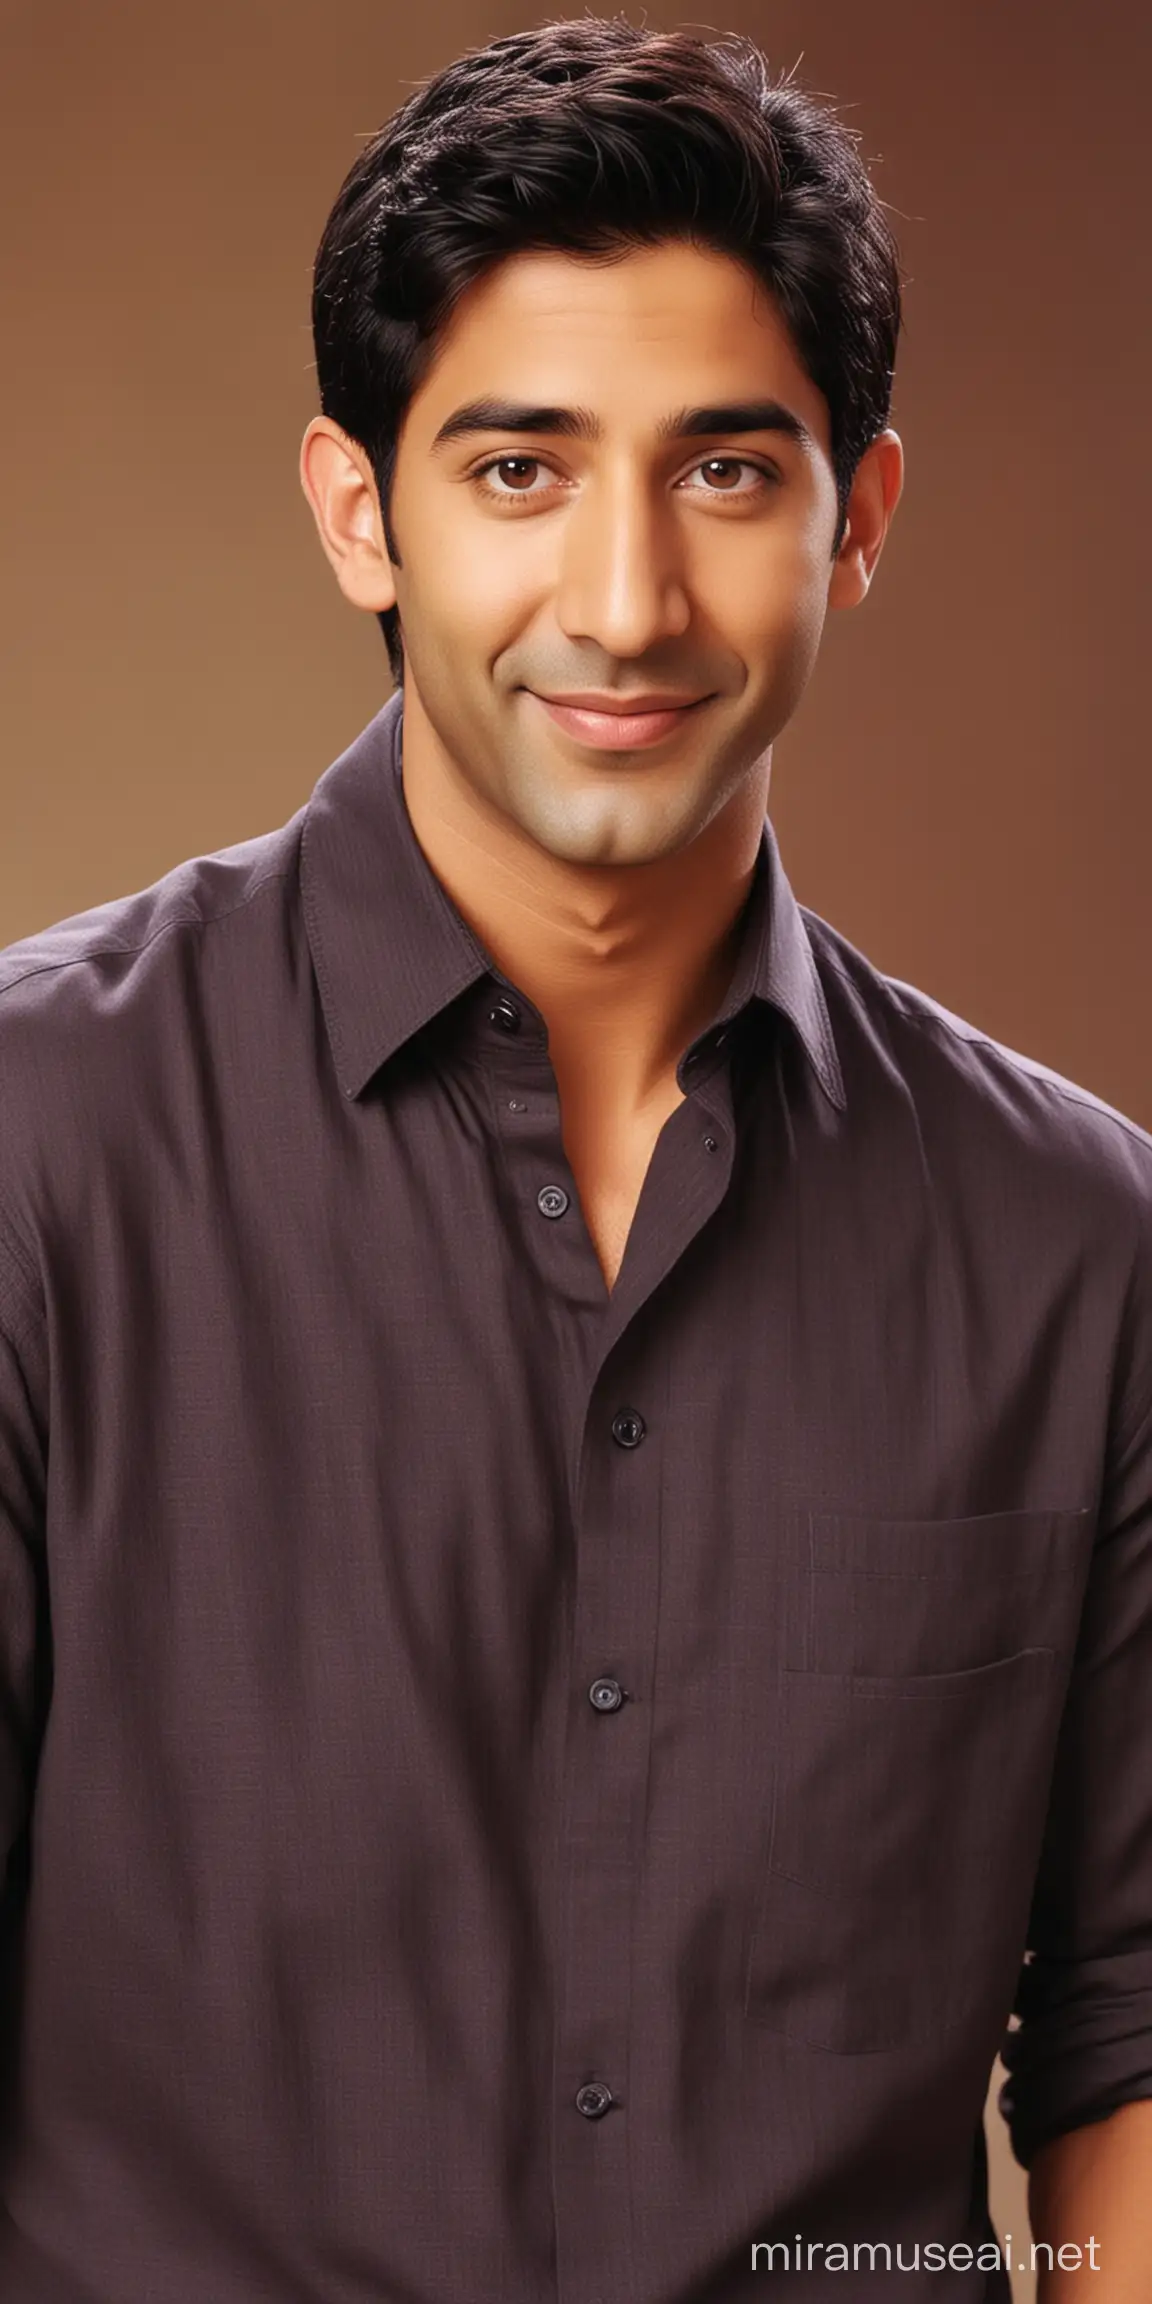 Indian Version of Ross from TV Show Friends